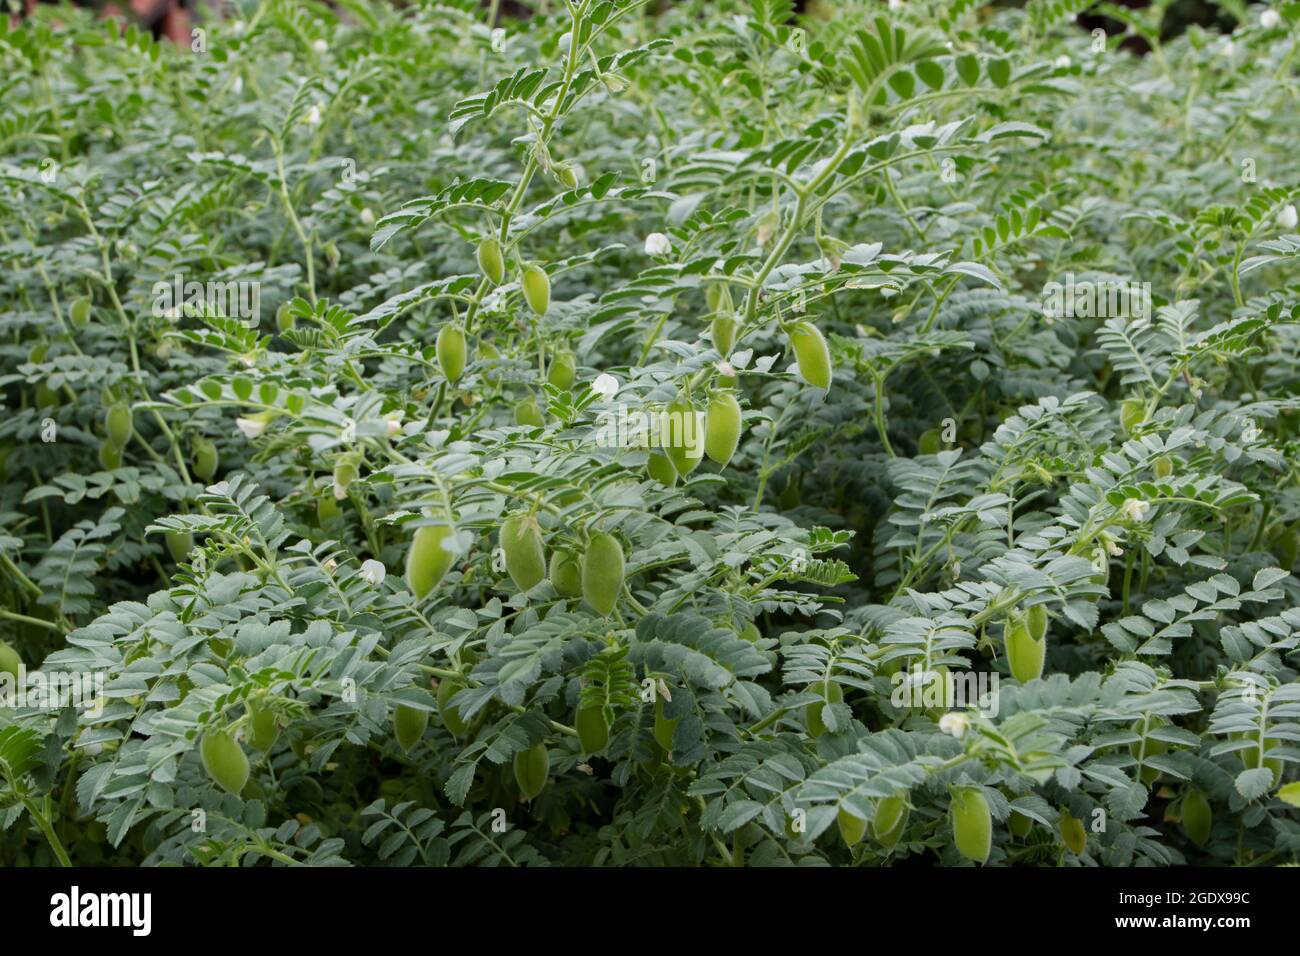 Chickpea or chick pea or Cicer arietinum plants with fruits and white flowers Stock Photo